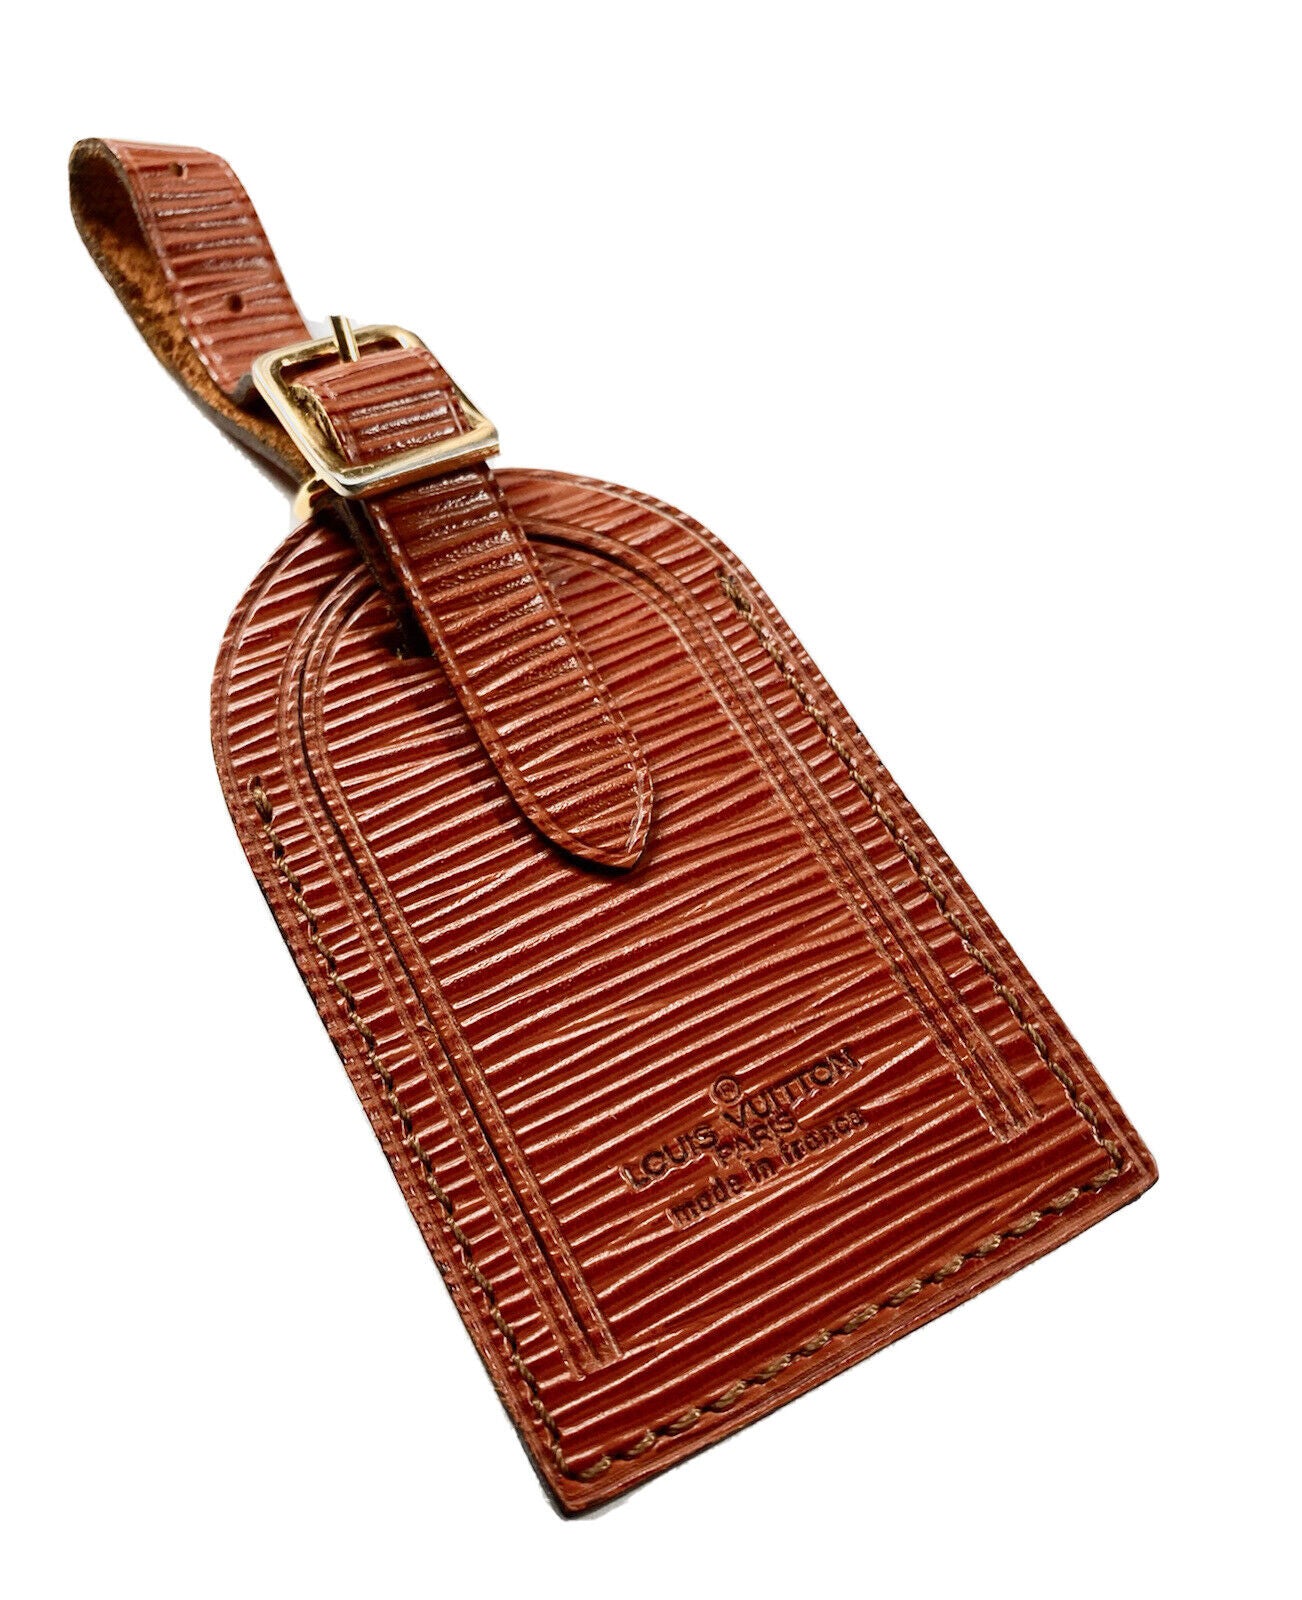 LOUIS VUITTON Epi Kenyan Fawn Luggage Tag Leather MADE IN FRANCE